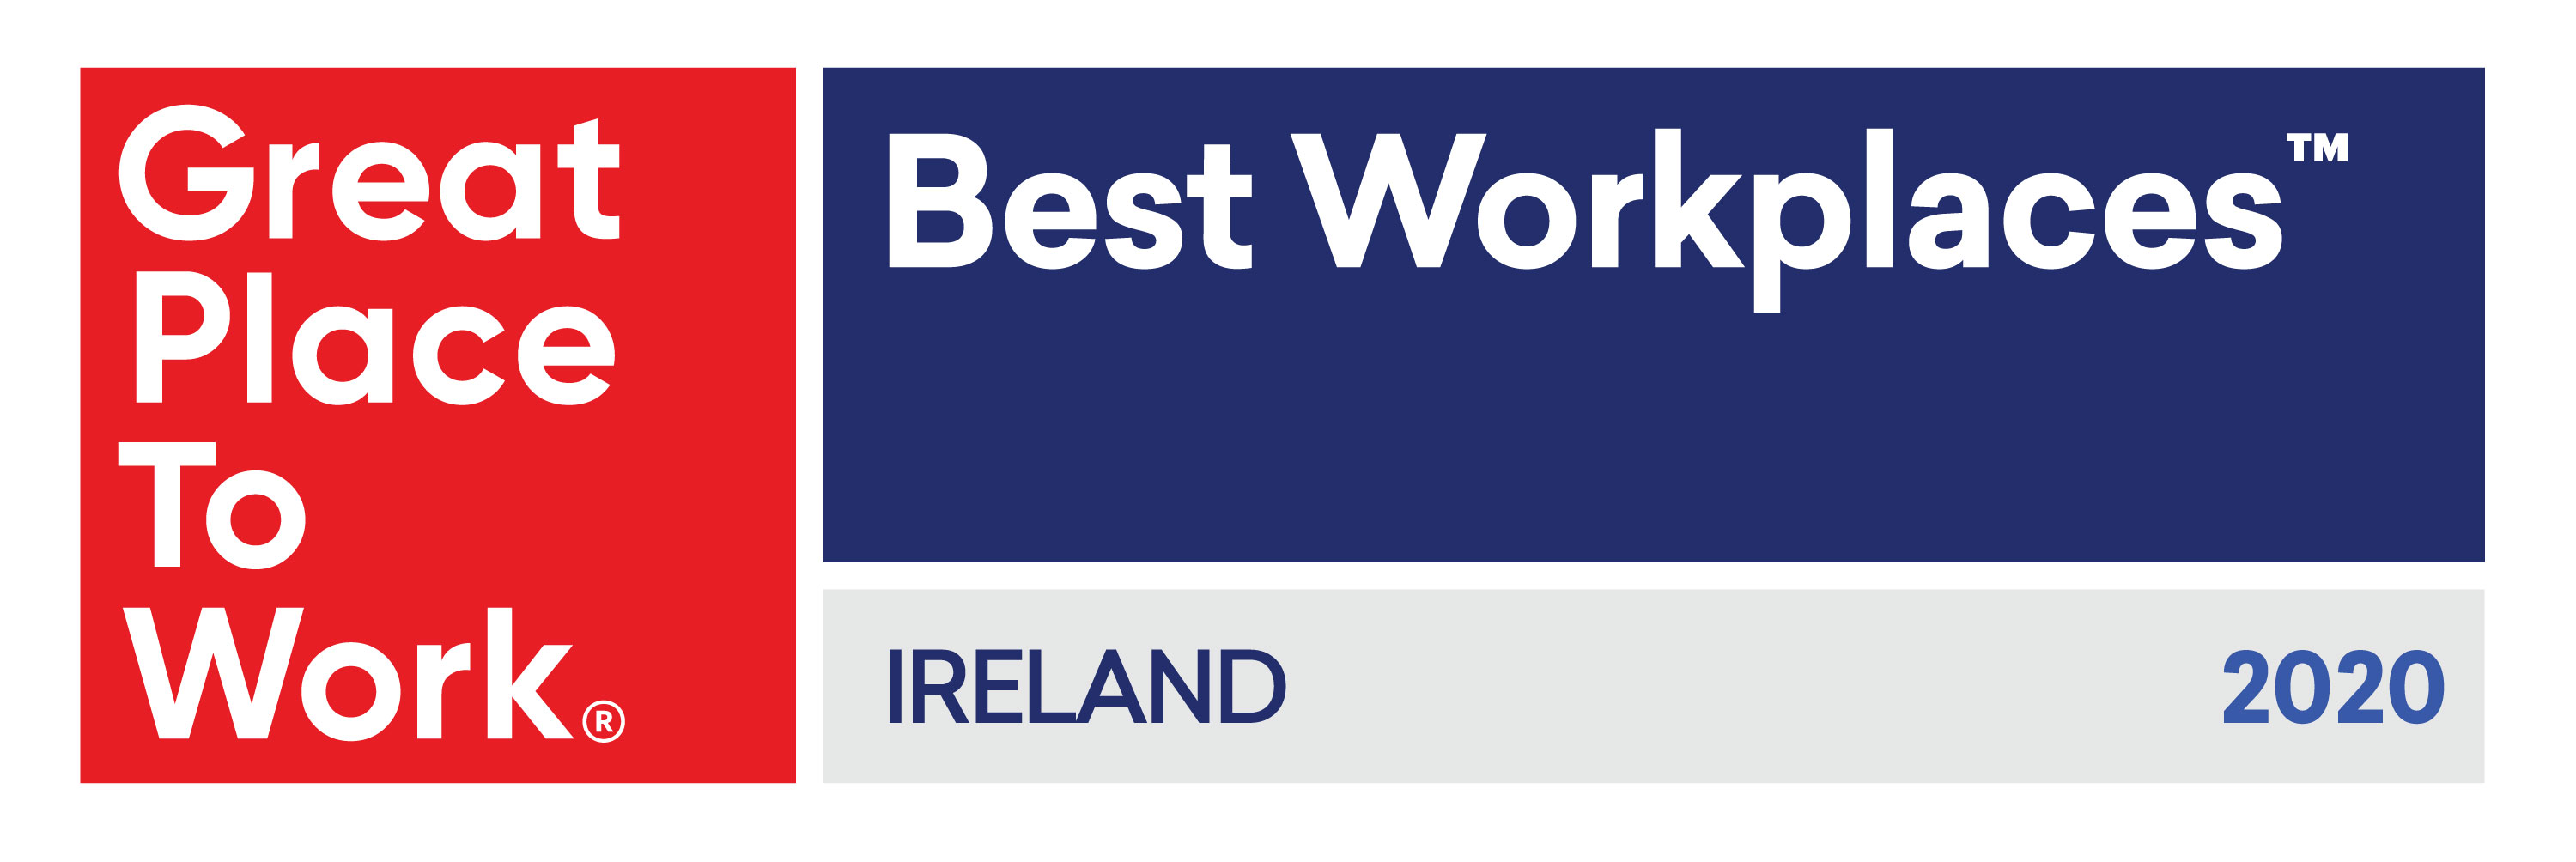 OpenJaw Technologies Named as One of the Best Workplaces in Ireland